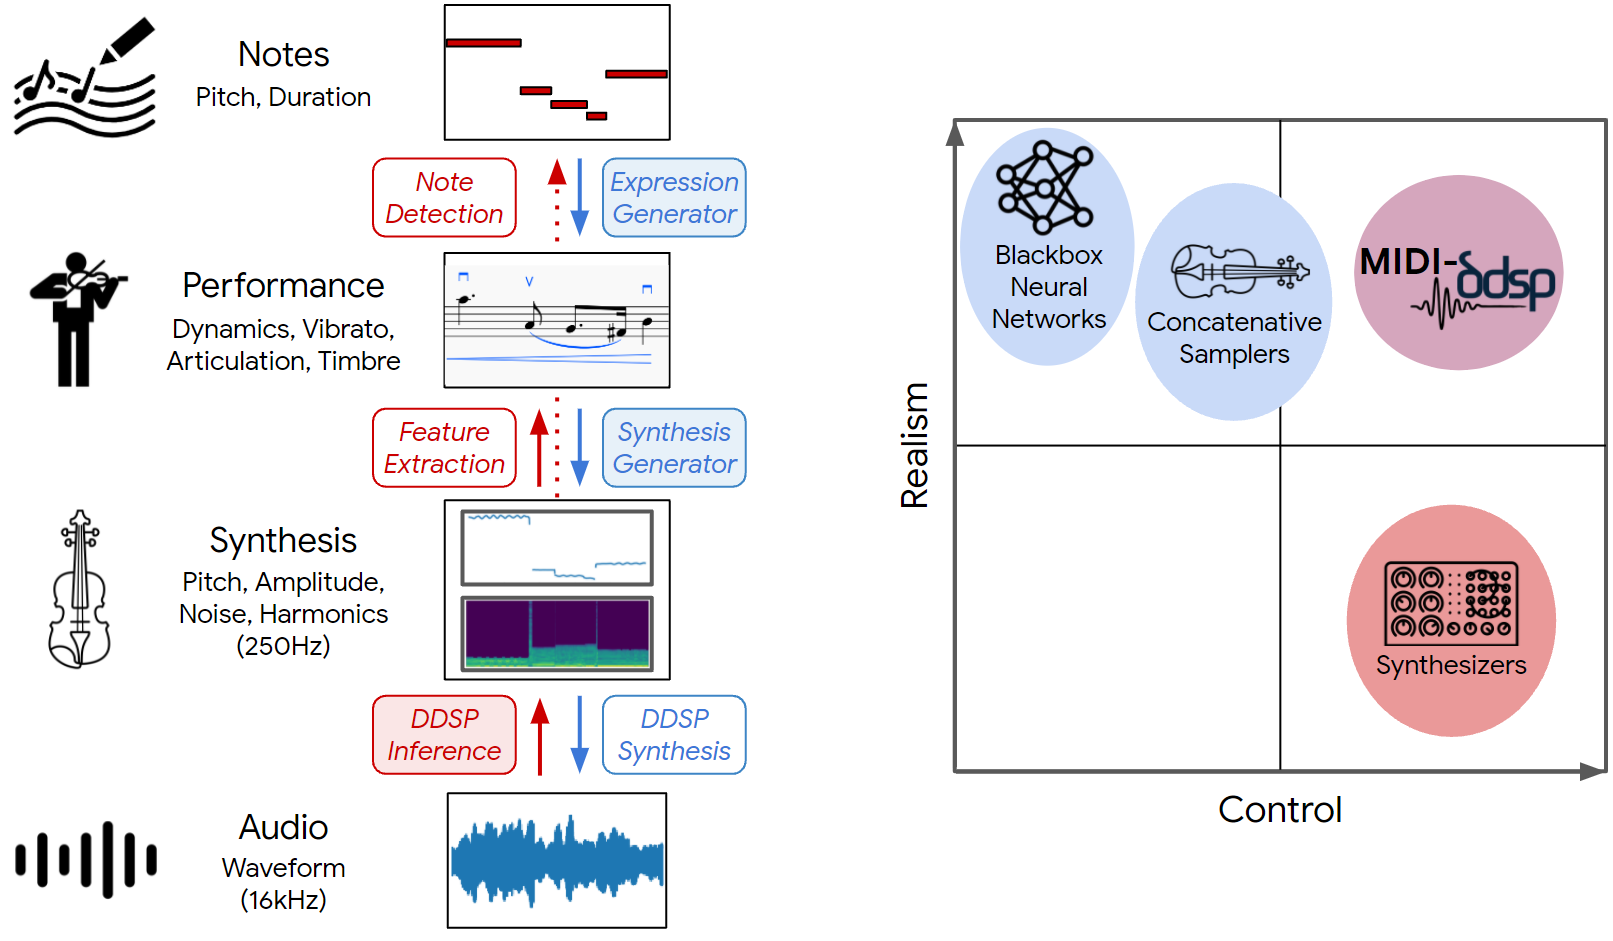 MIDI-DDSP: Detailed Control of Musical Performance via Hierarchical Modeling